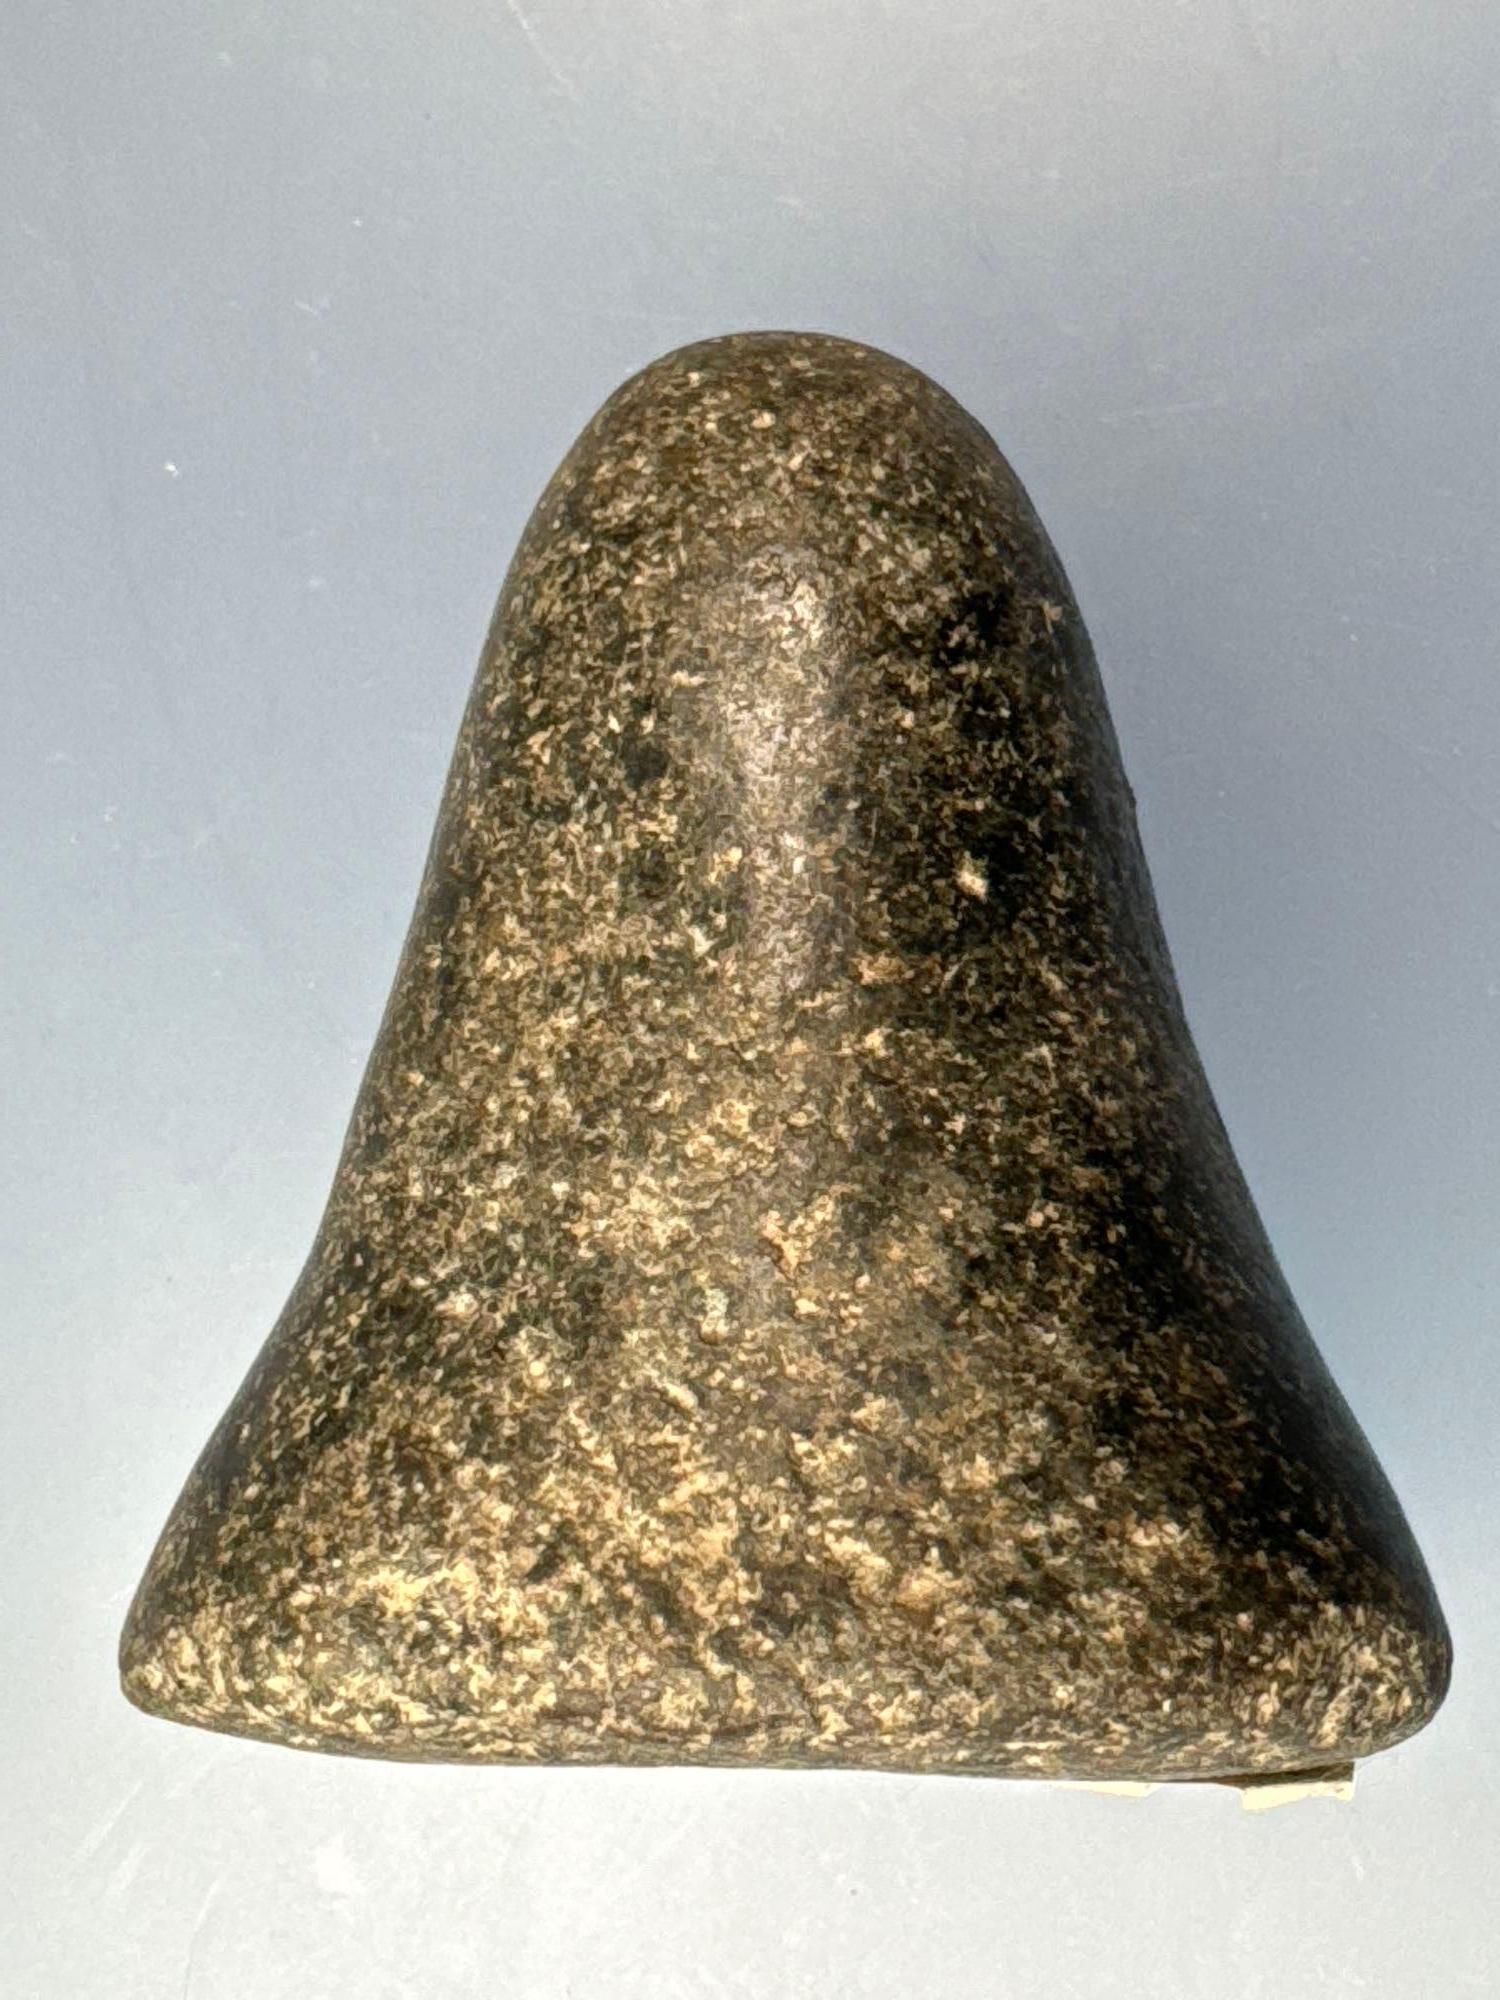 3 7/8" Highly Polished Hardstone Bell Pestle, Dimple on Bottom, Found in Ohio, Ex: Carence Haushouer